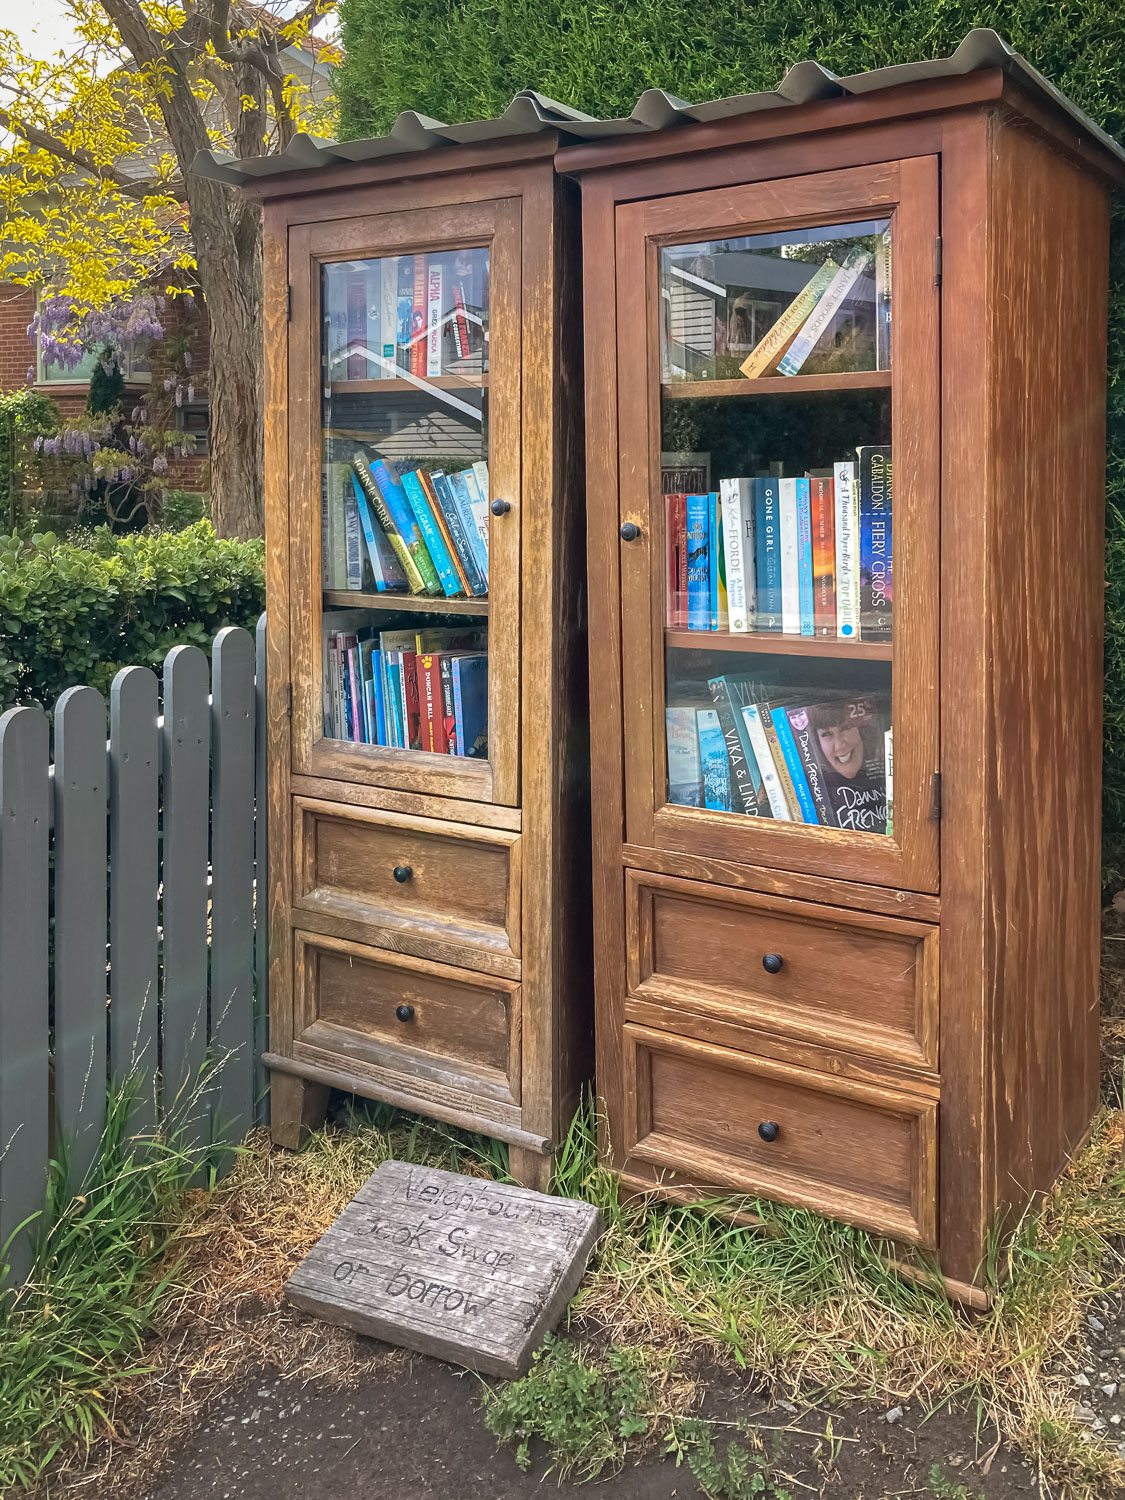 A wooden cupboard with glass doors and wooden drawers set up as a street library